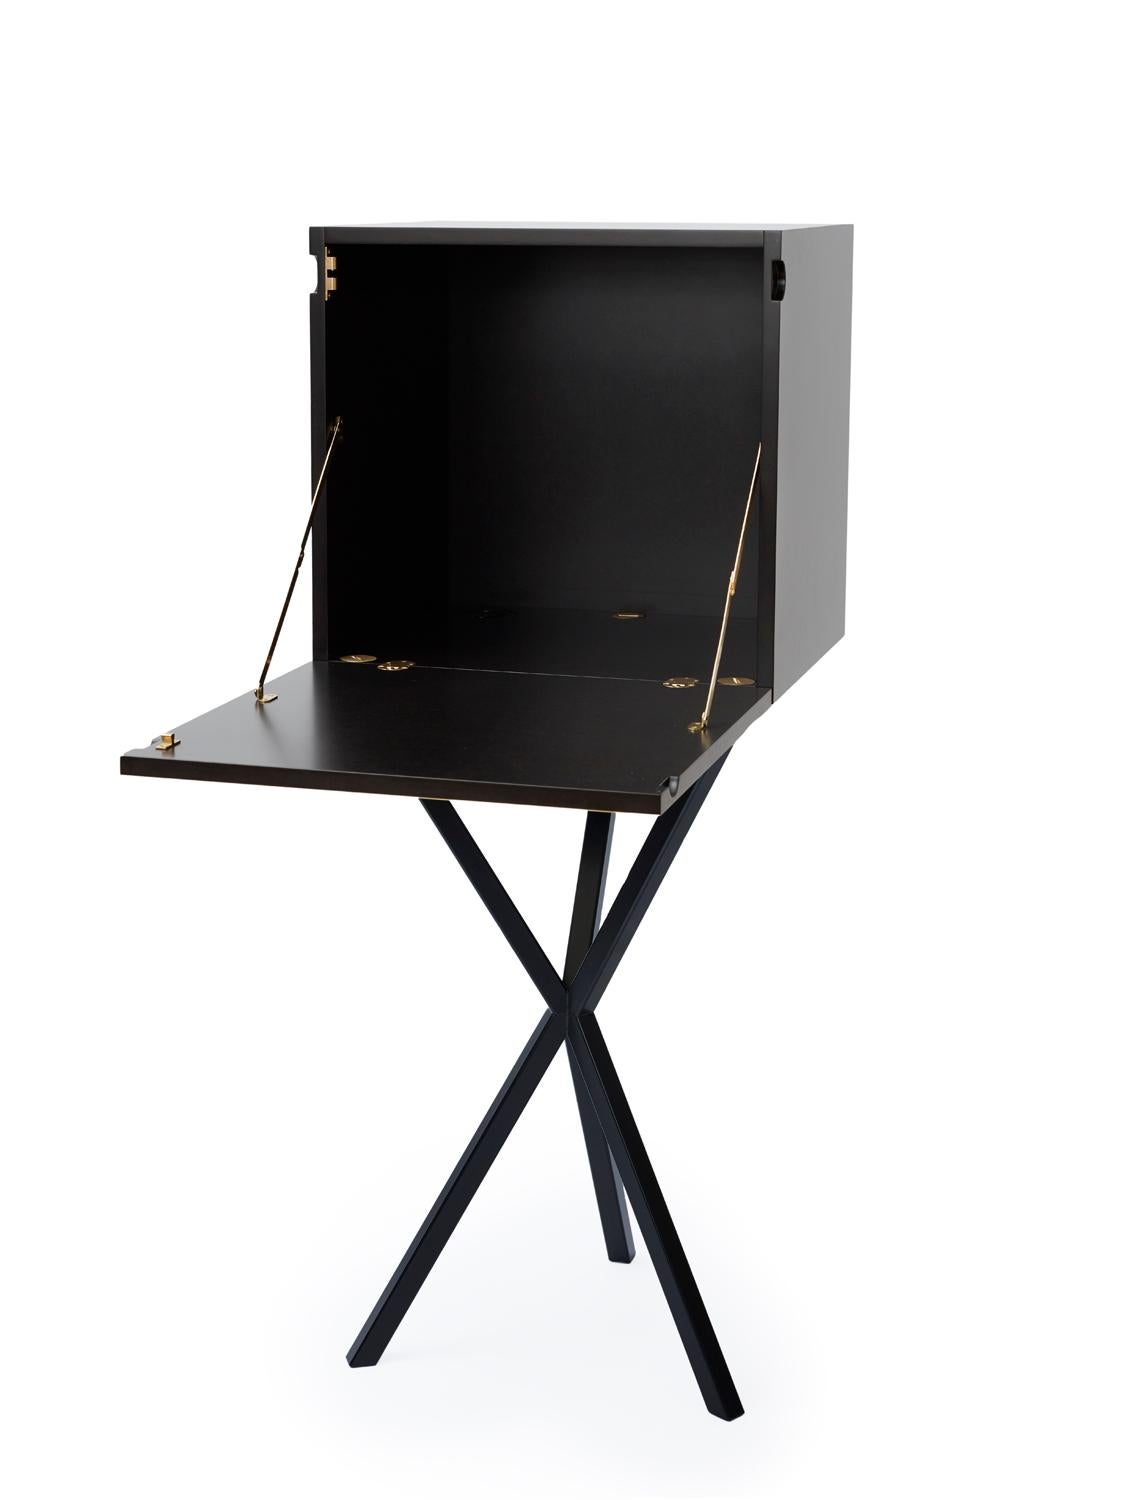 This Scandinavian contemporary bar unit is a handmade piece made in Sweden by designer Per Söderberg. The piece can be used as a bar unit, as a storage cabinet or as a small work desk.

The top is made in valchromat with a low sheen finish and has